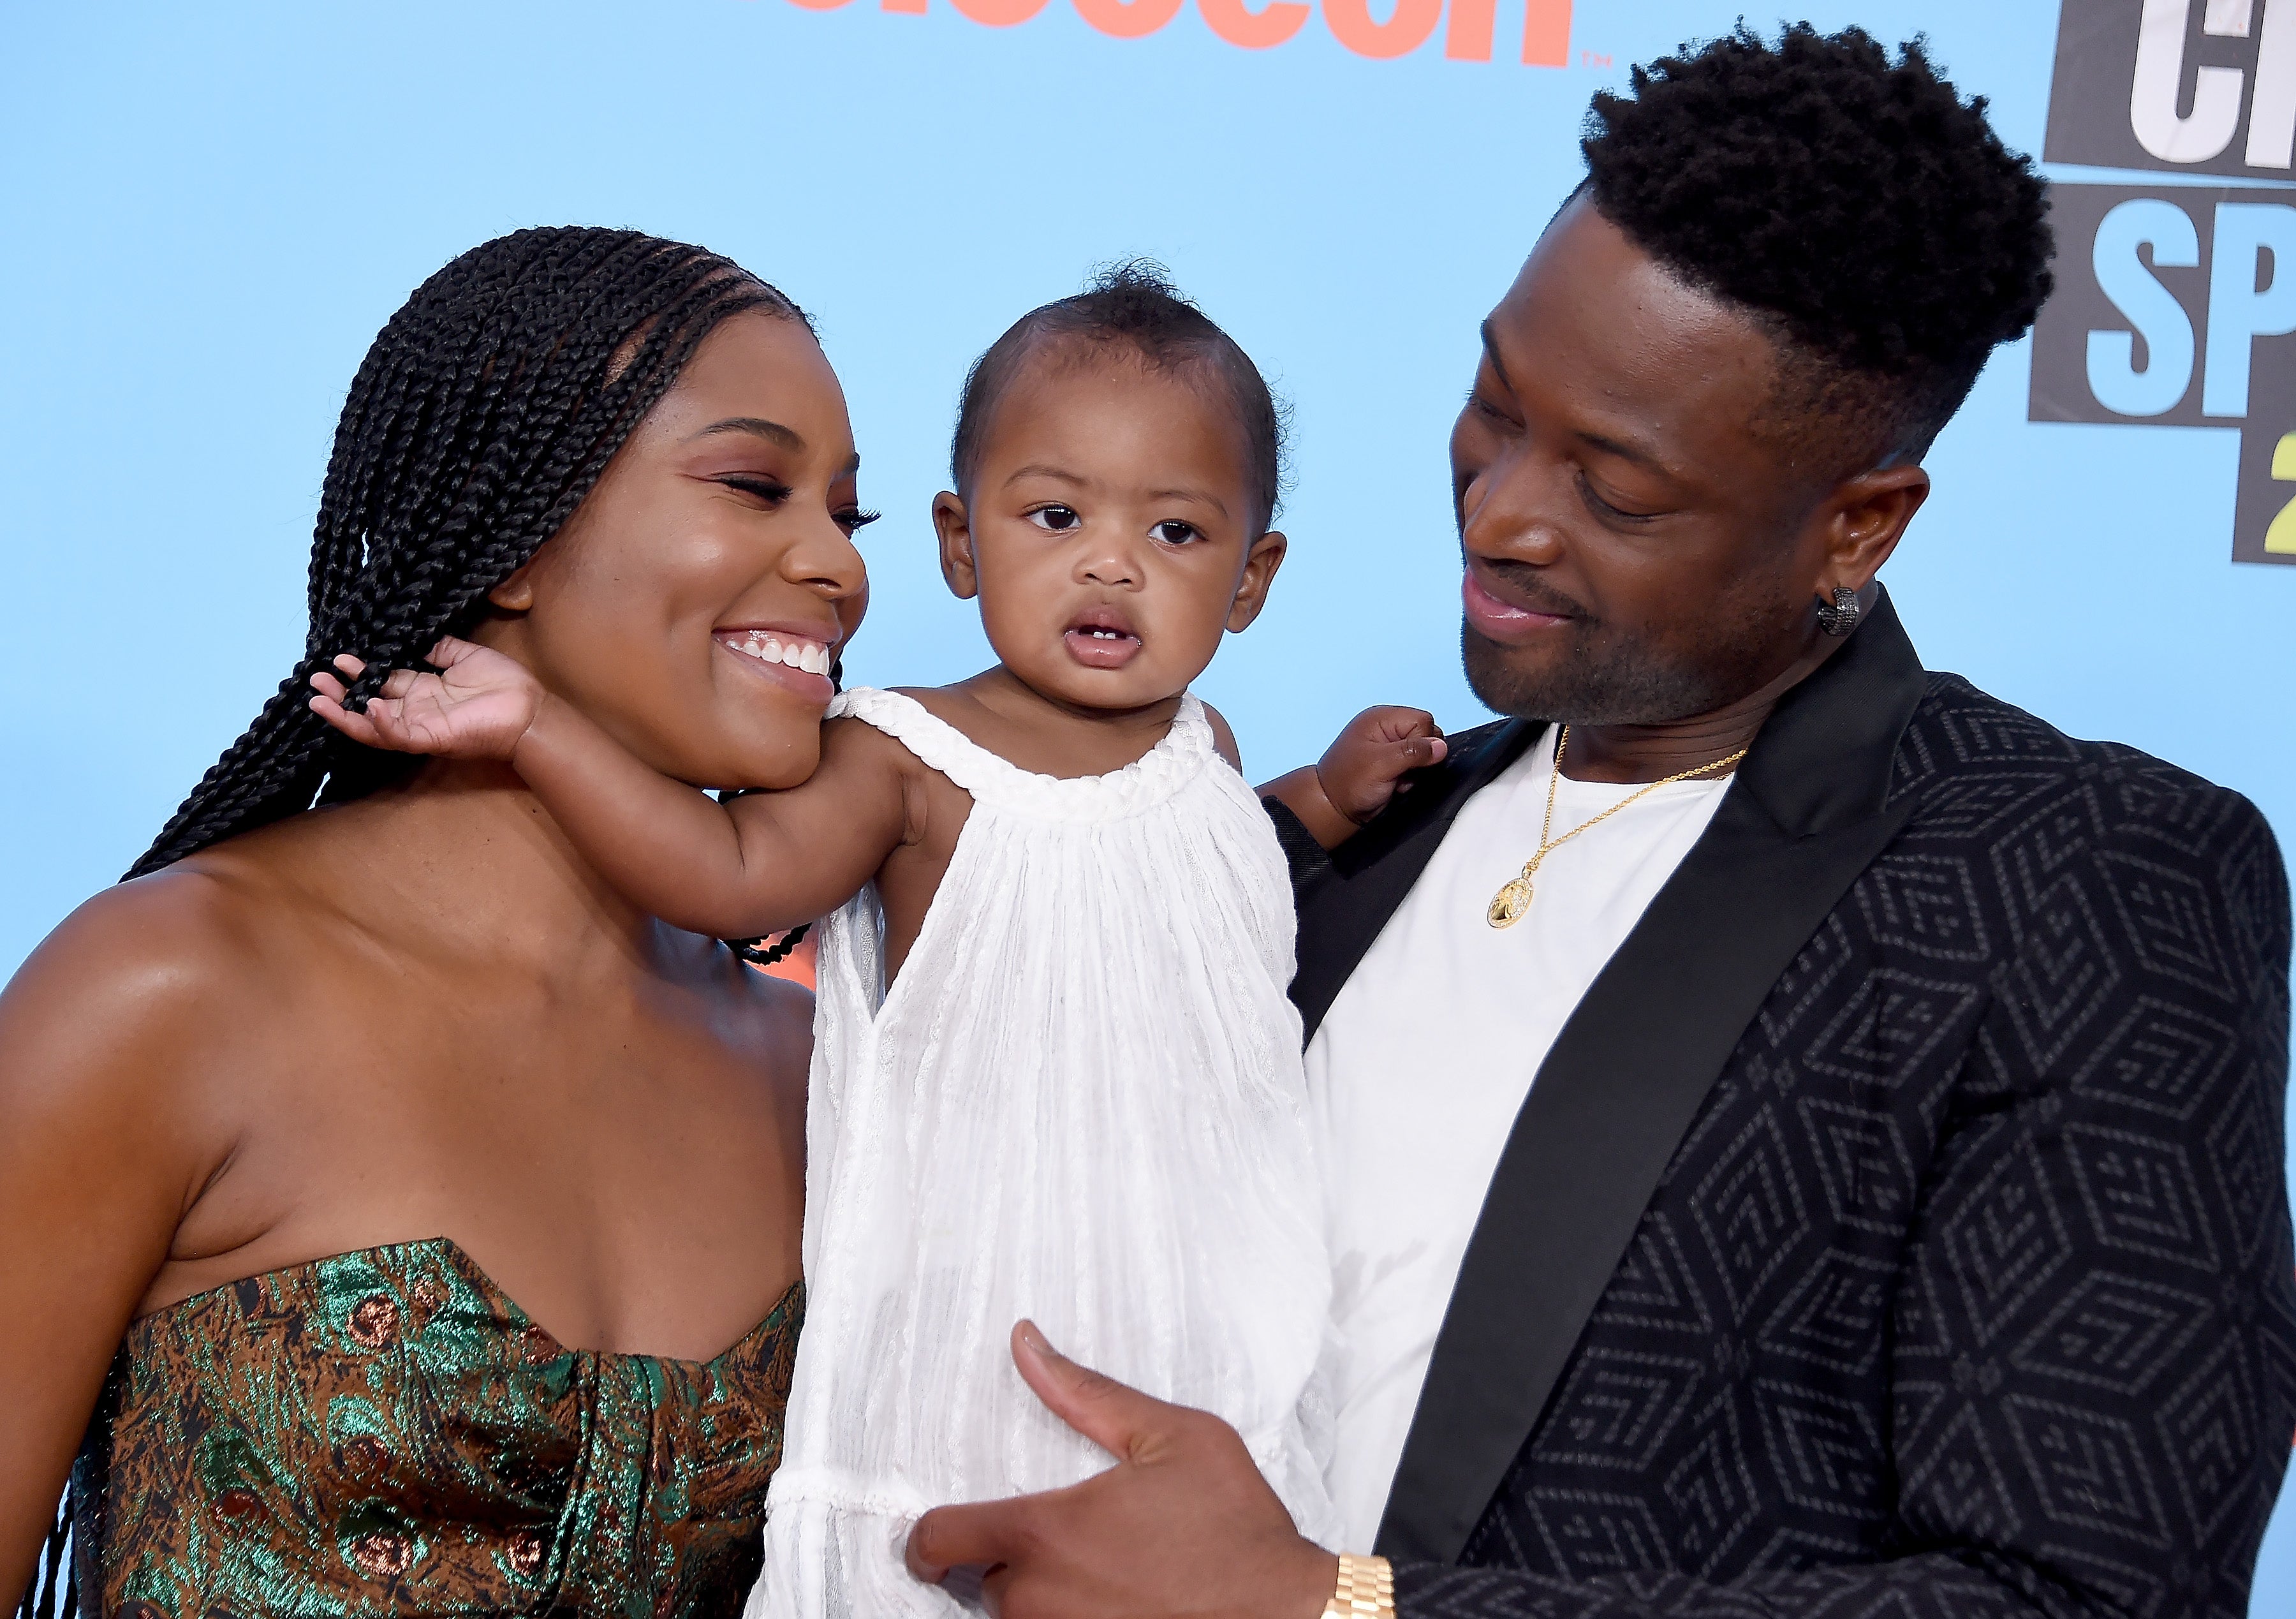 Gabrielle Union and Daughter Kaavia James Are Twinning in Cute New  Hairstyles